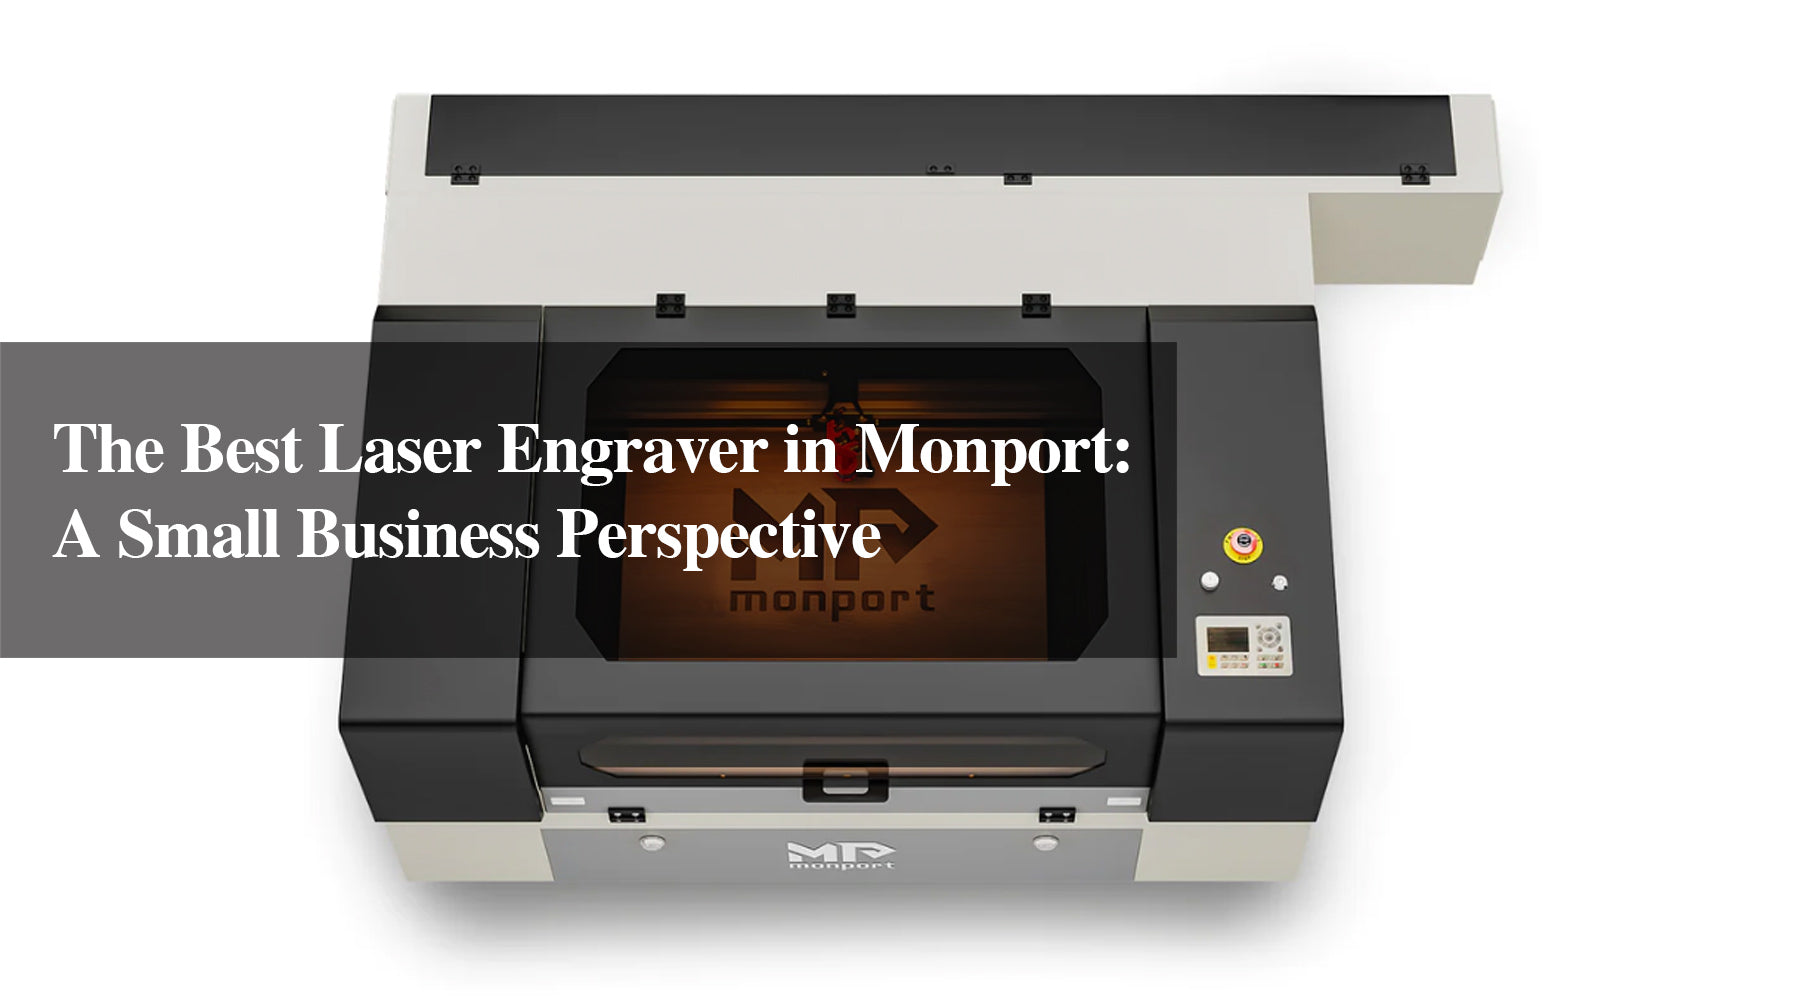 The Best Laser Engraver in Monport: A Small Business Perspective